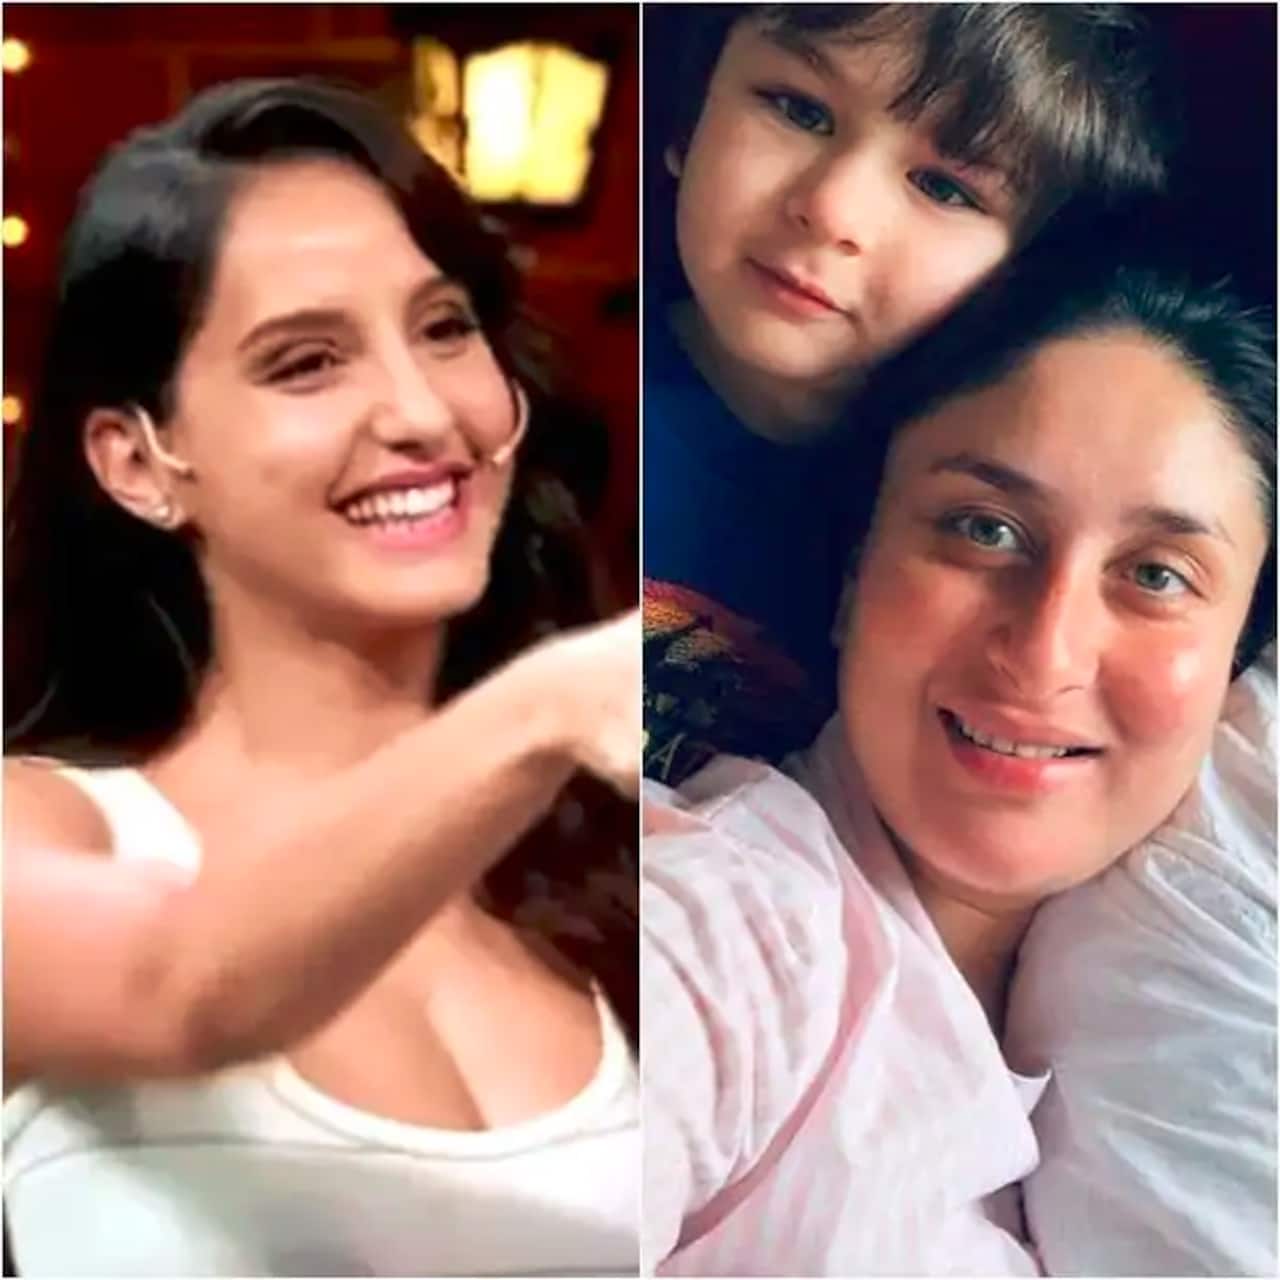 Trending Entertainment News Today — Kareena Kapoor reacts on Nora Fatehi wanting to marry Taimur Ali Khan; Aamir Khan trolled for not wearing a mask while playing cricket